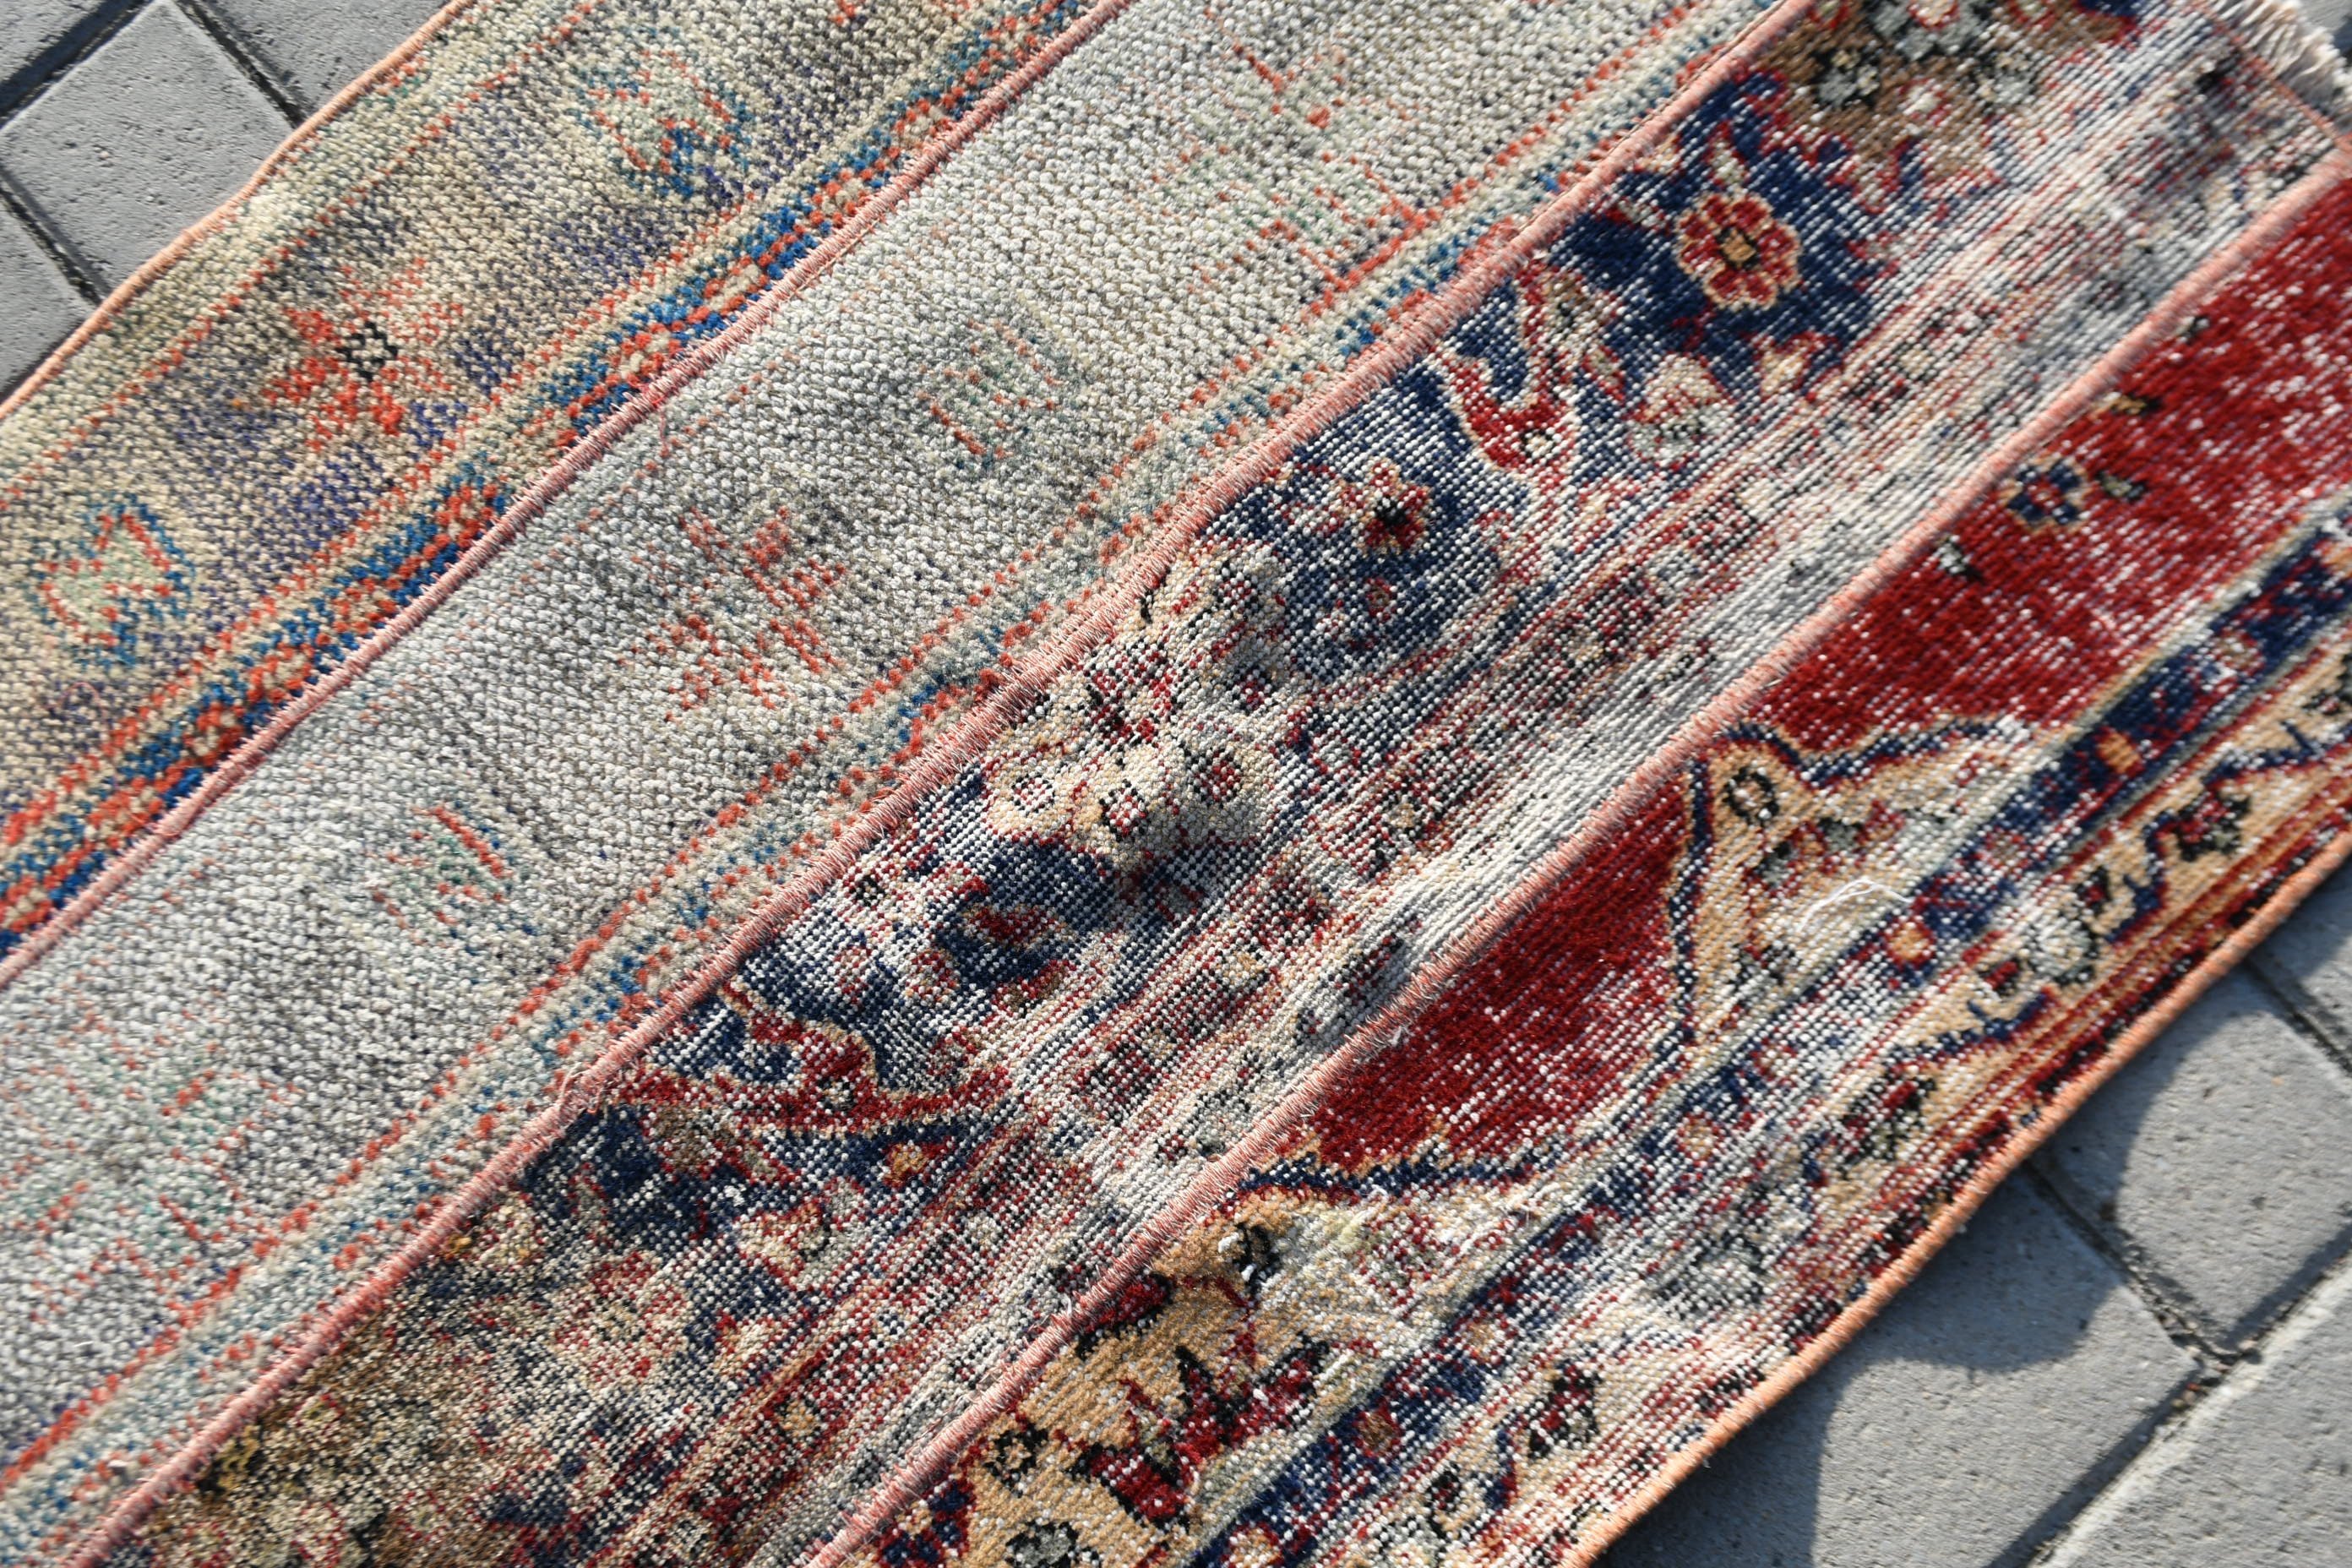 Kitchen Rug, Vintage Rug, Anatolian Rug, Rugs for Entry, 2.4x3.3 ft Small Rugs, Car Mat Rug, Turkish Rugs, Red Antique Rug, Oriental Rug